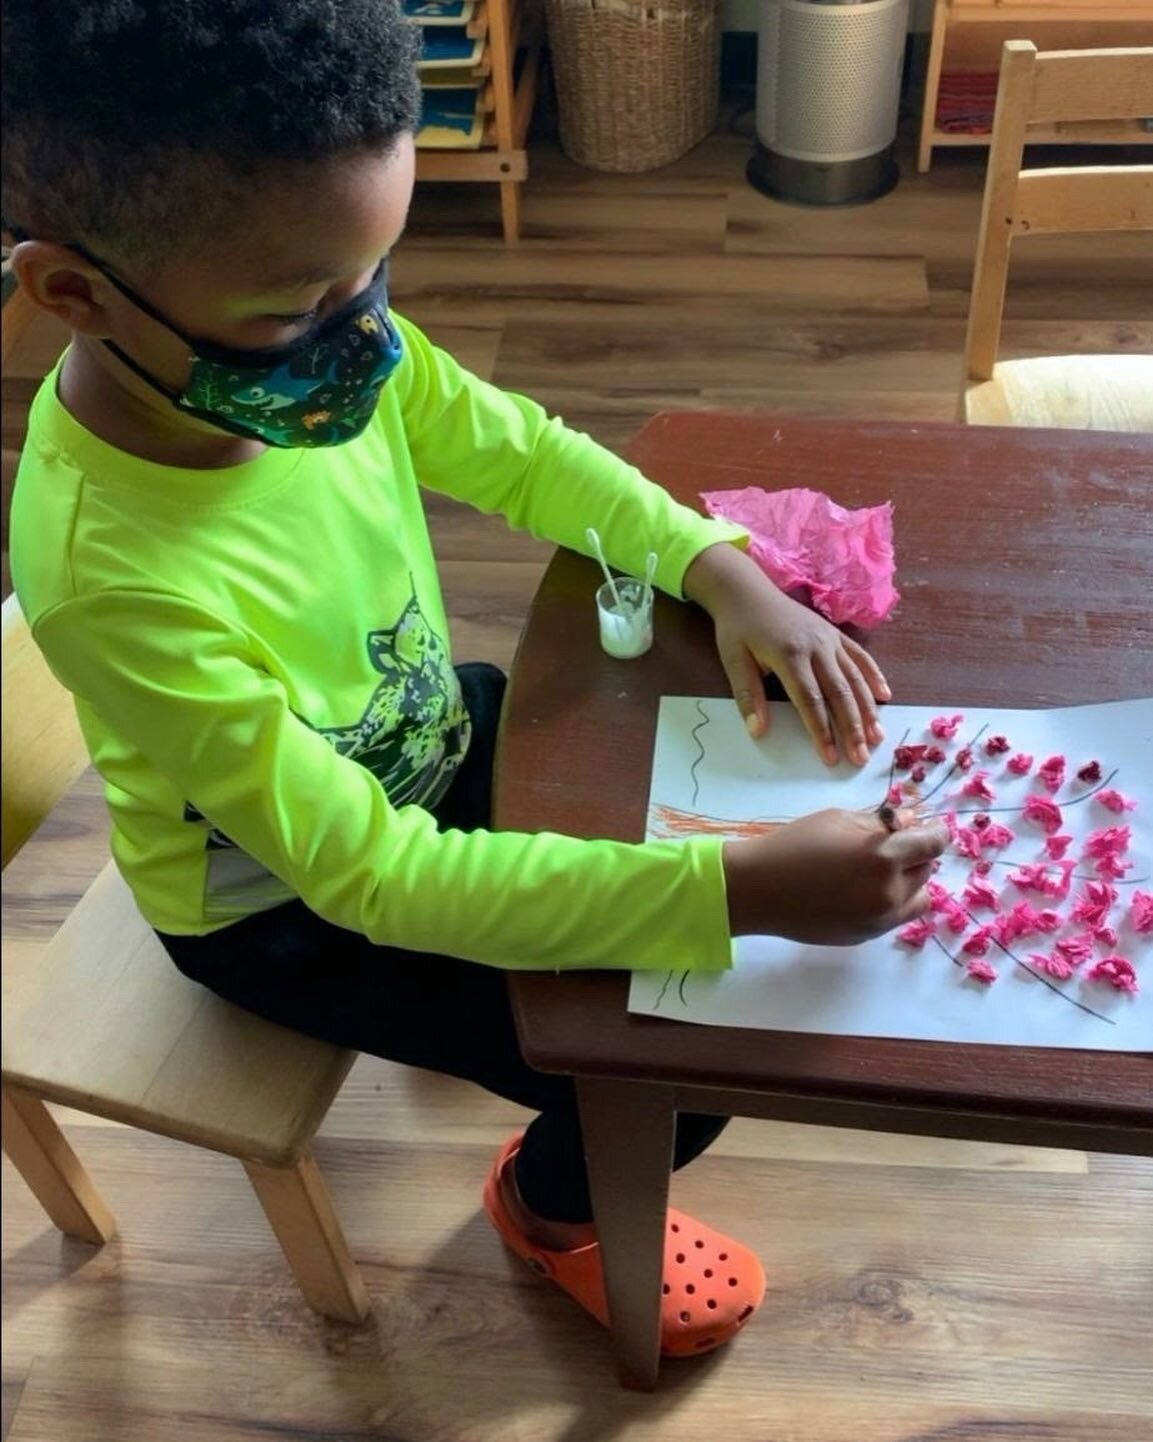 Spring is officially here! 🌸

We have been enjoying seasonal crafts, including creating flowering trees bud-by-bud. 

Arts and crafts provide a plethora of educational benefits to children, including the development of fine motor skills, creativity,